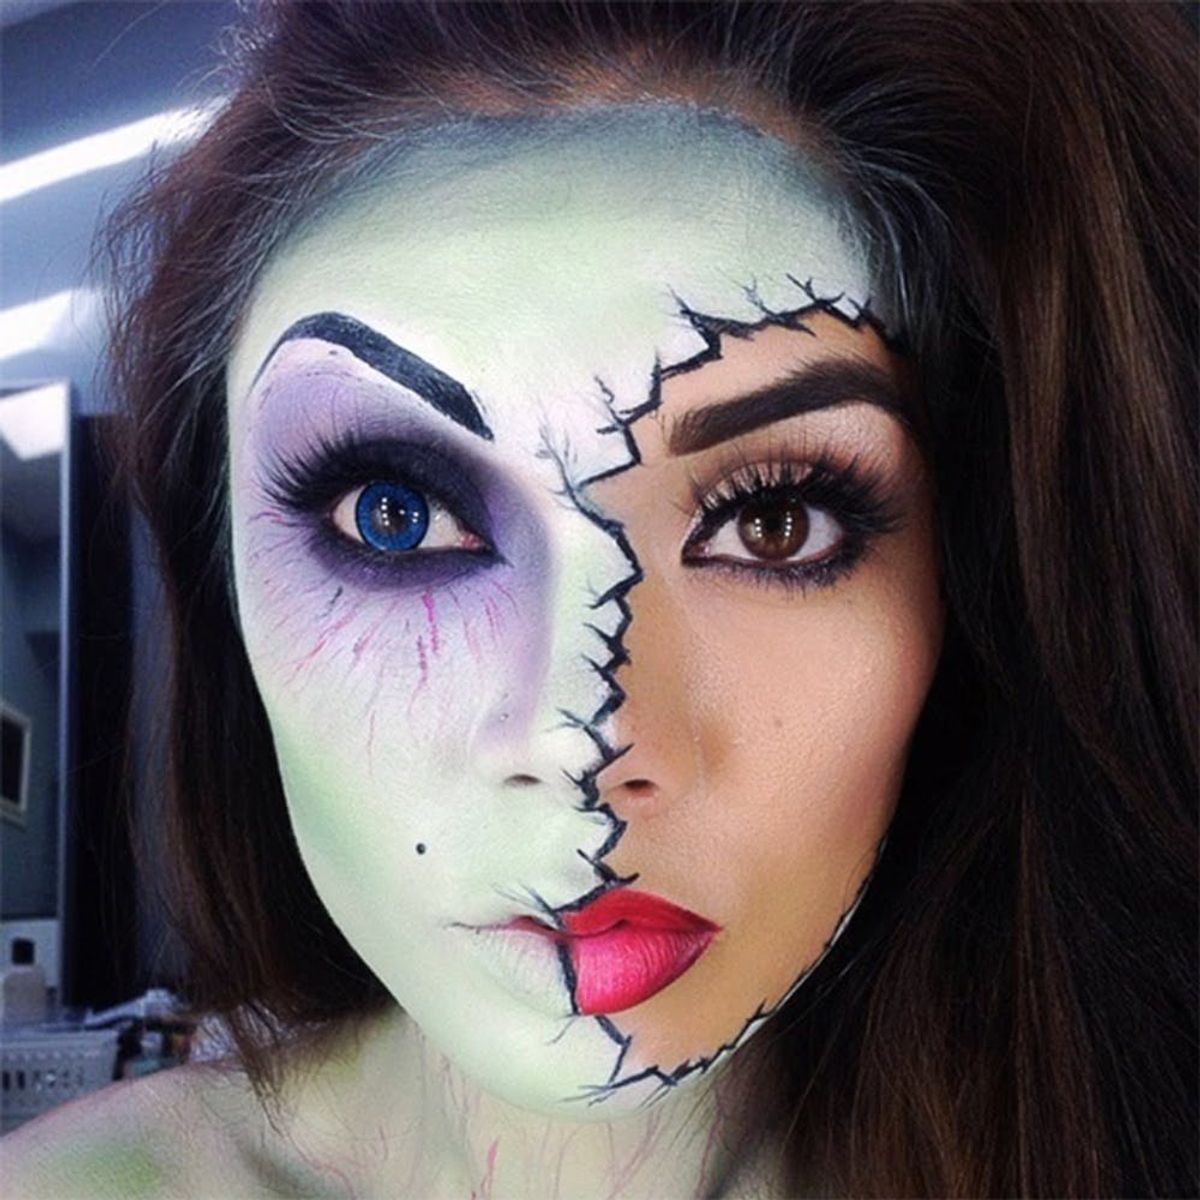 15 of the Best Scary-Chic Halloween Makeup Tutorials on YouTube